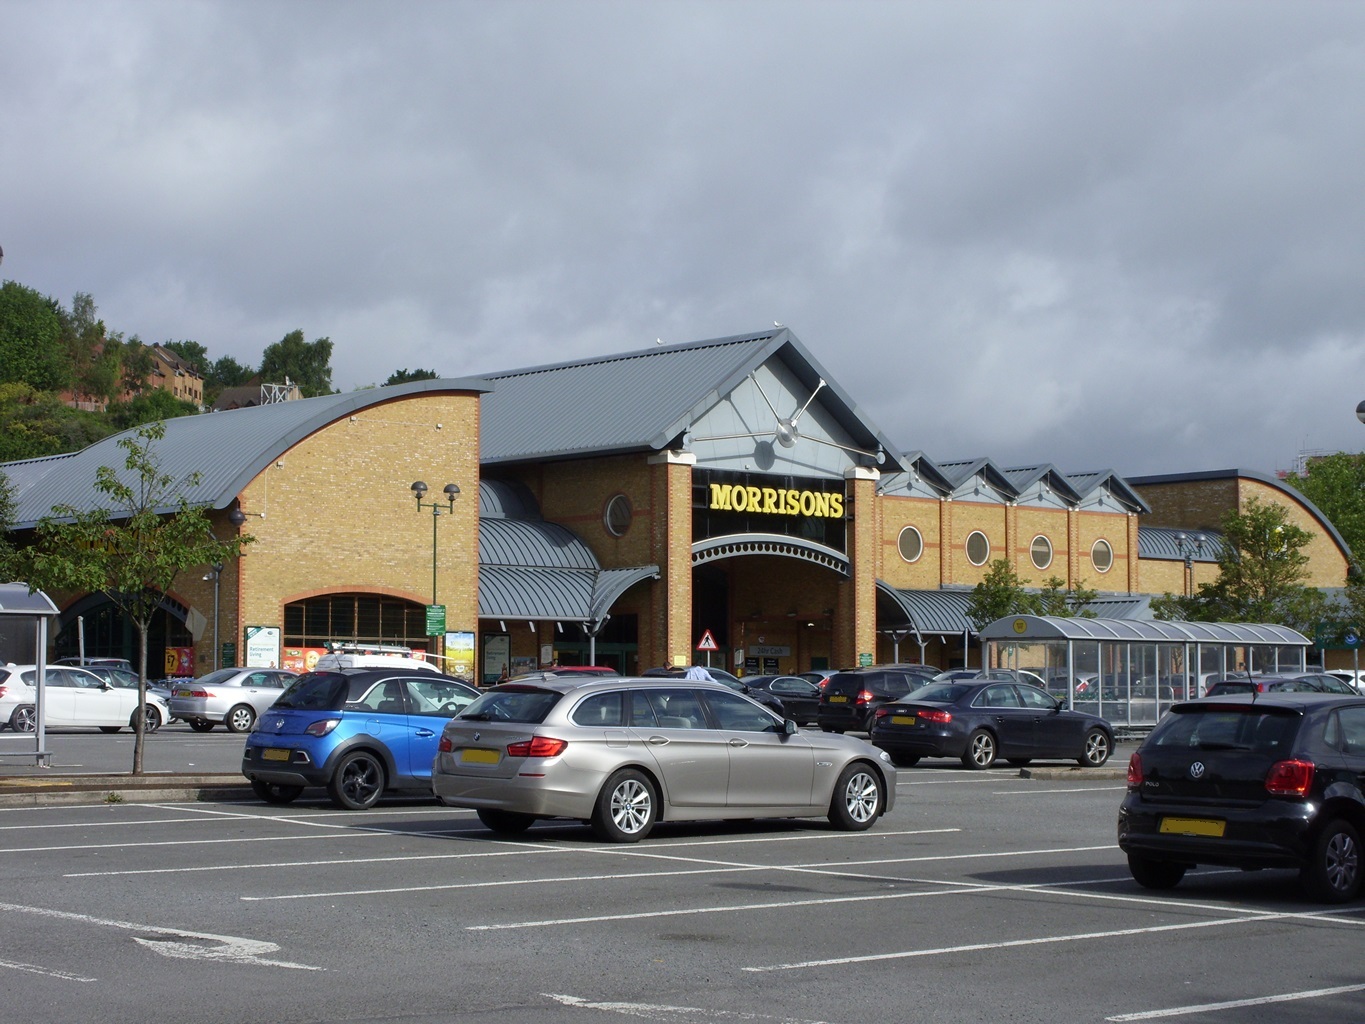 HighWycombe-TempleEnd-Morrisons-2017-07-28-SDC14282